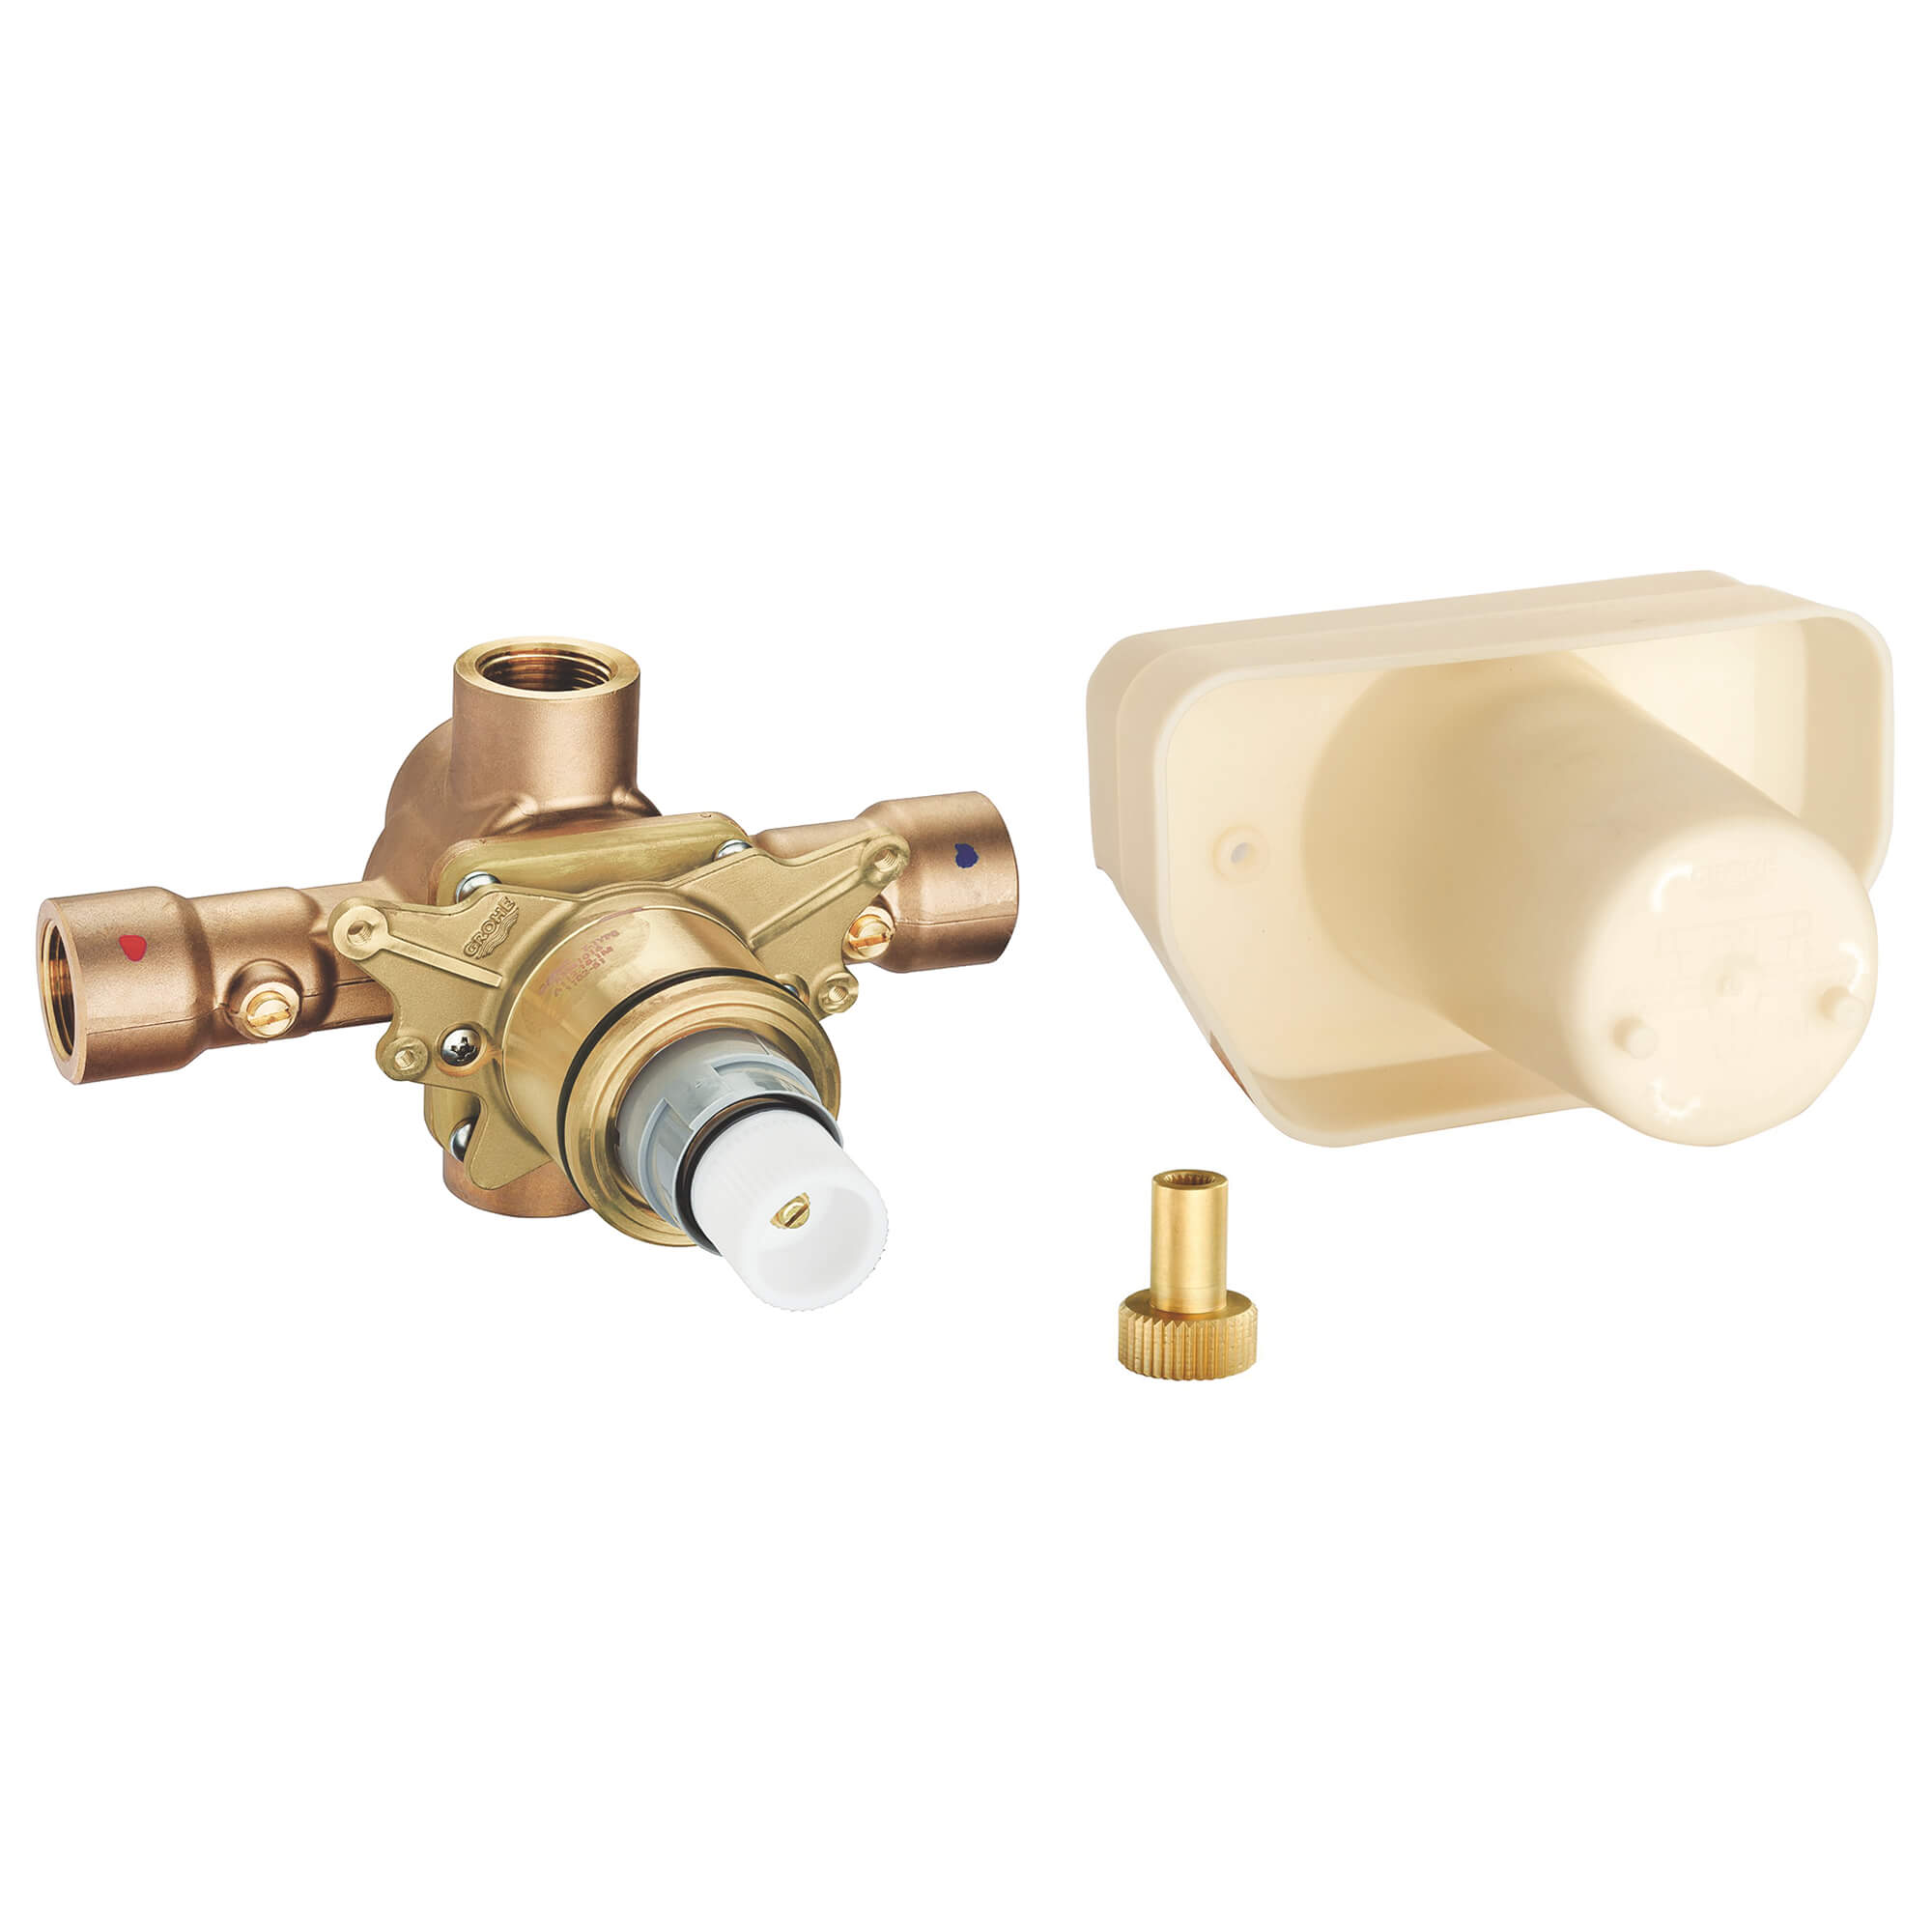 3/4" Thermostatic Rough-In Valve